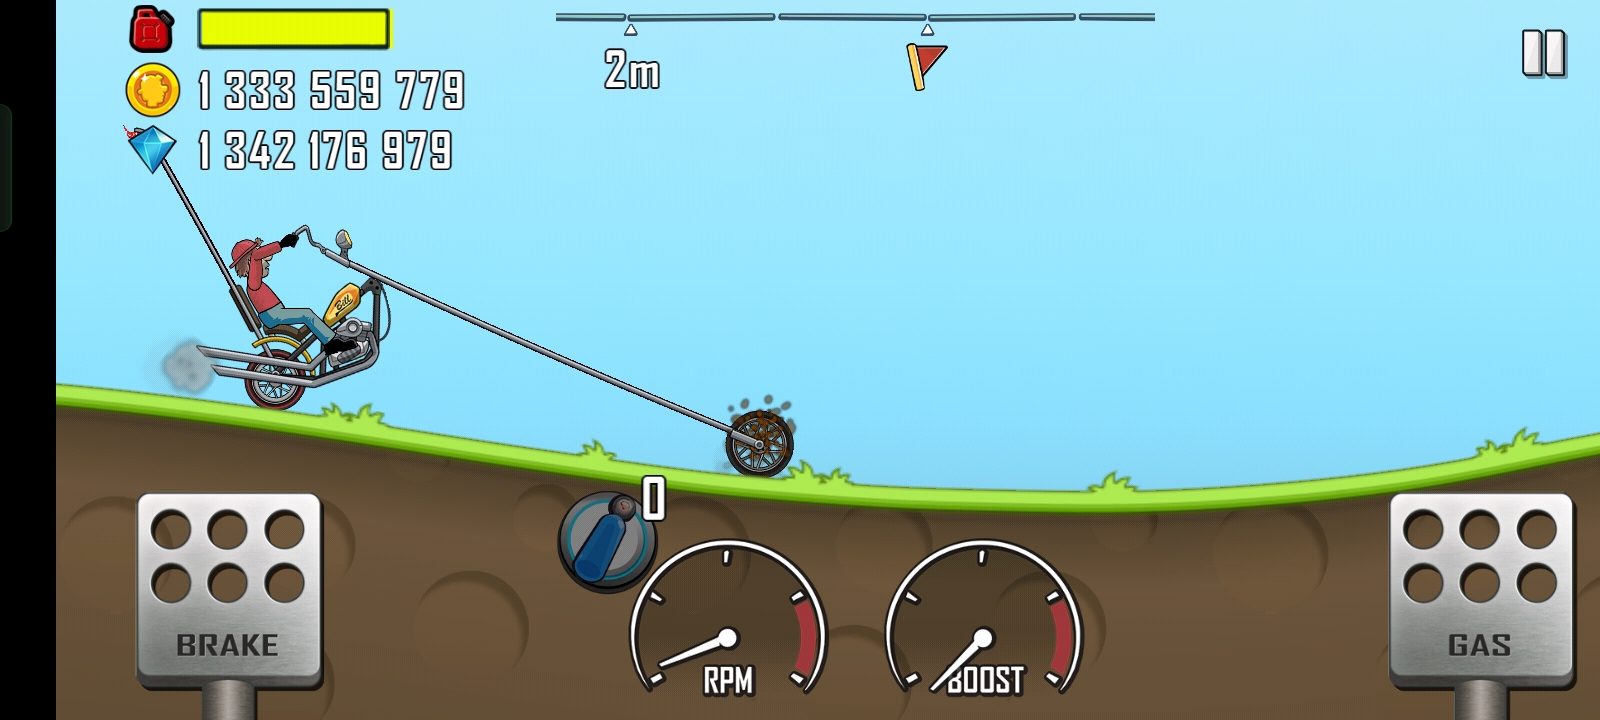 Hill Climb Racing Mod Apk v1.60.0 Unlimited Fuel And Money And Gems